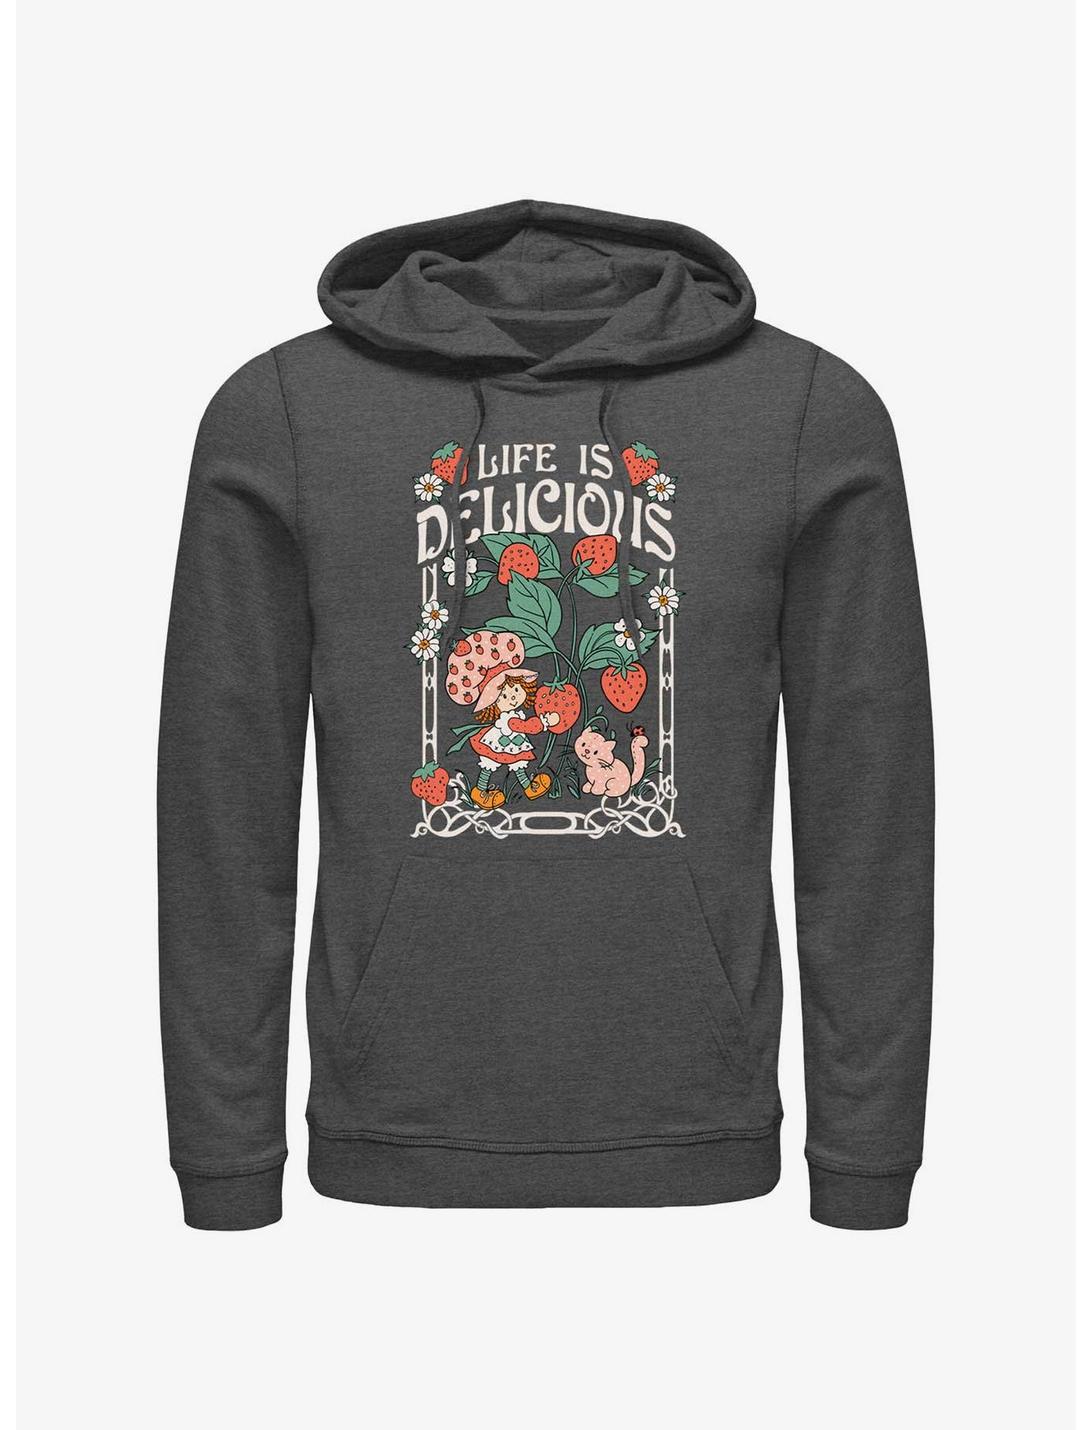 Strawberry Shortcake Life Is Delicious Hoodie, CHAR HTR, hi-res